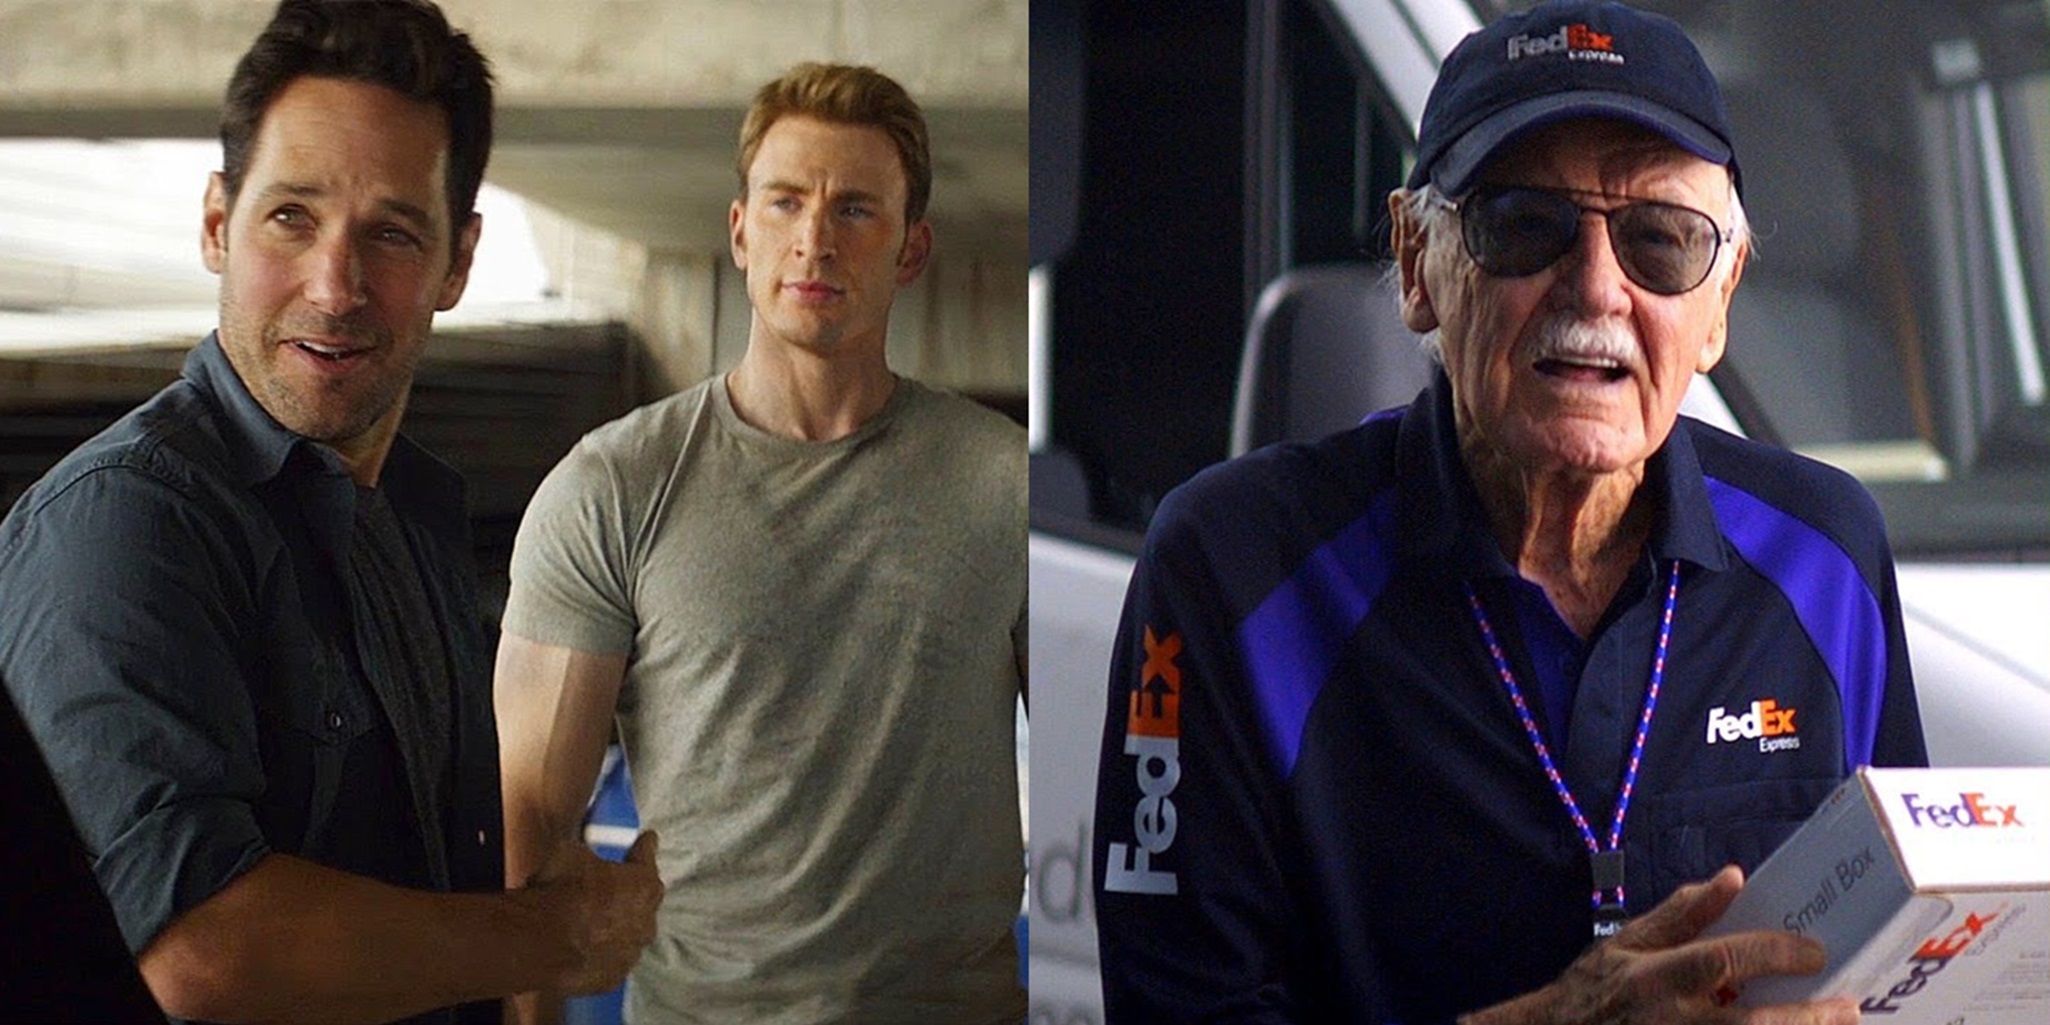 Ant Man and Captain America standing together; Stan Lee's cameo in Captain America: Civil War